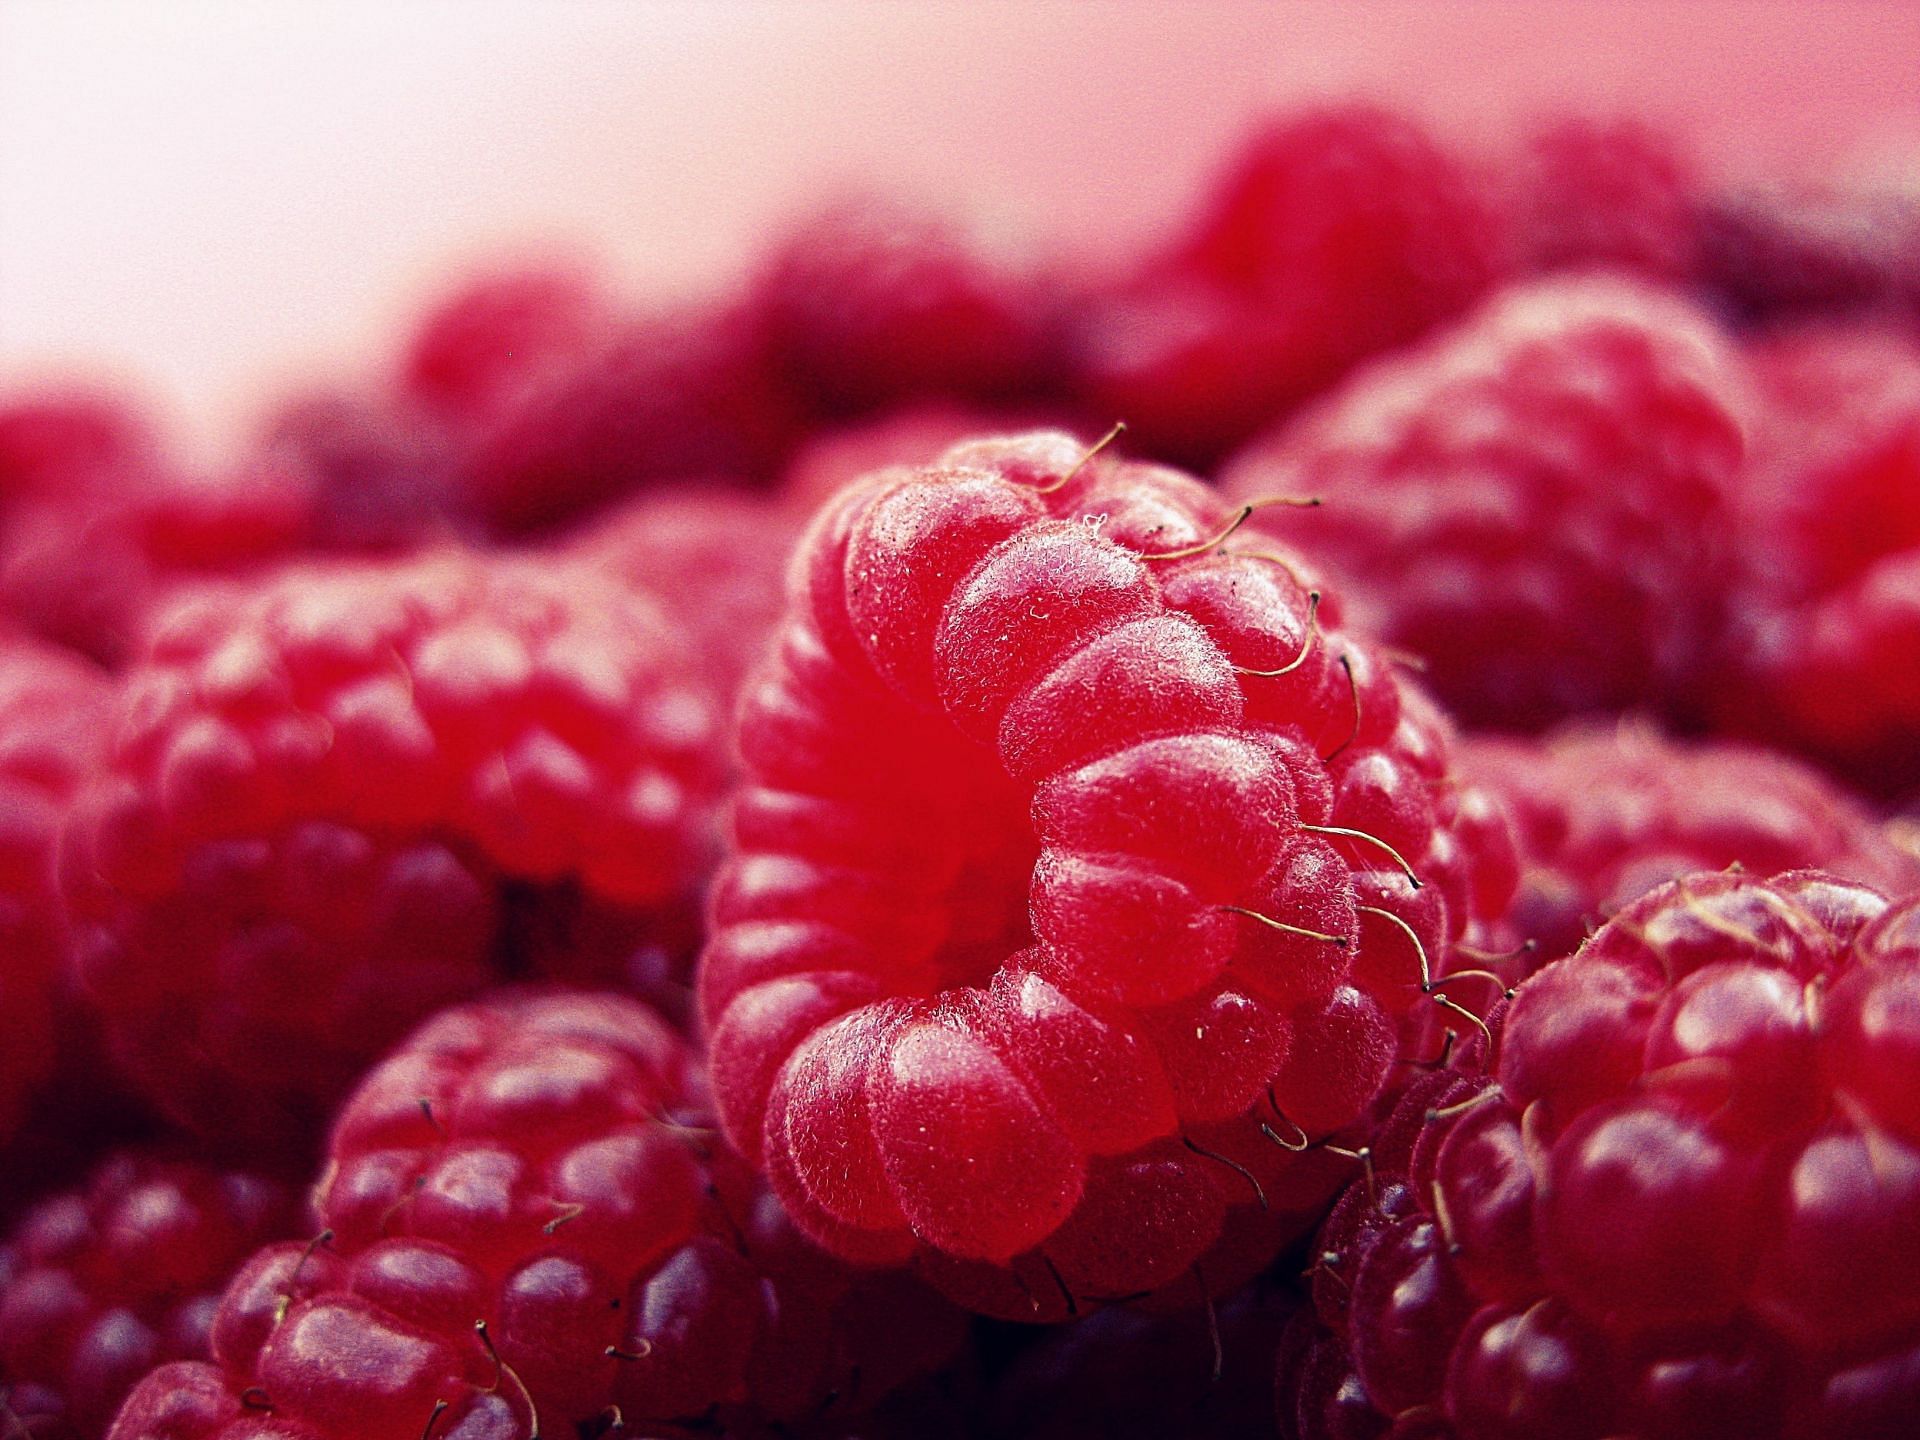 Eating to help anxiety via berries (image sourced via Pexels / Photo by Pixabay)